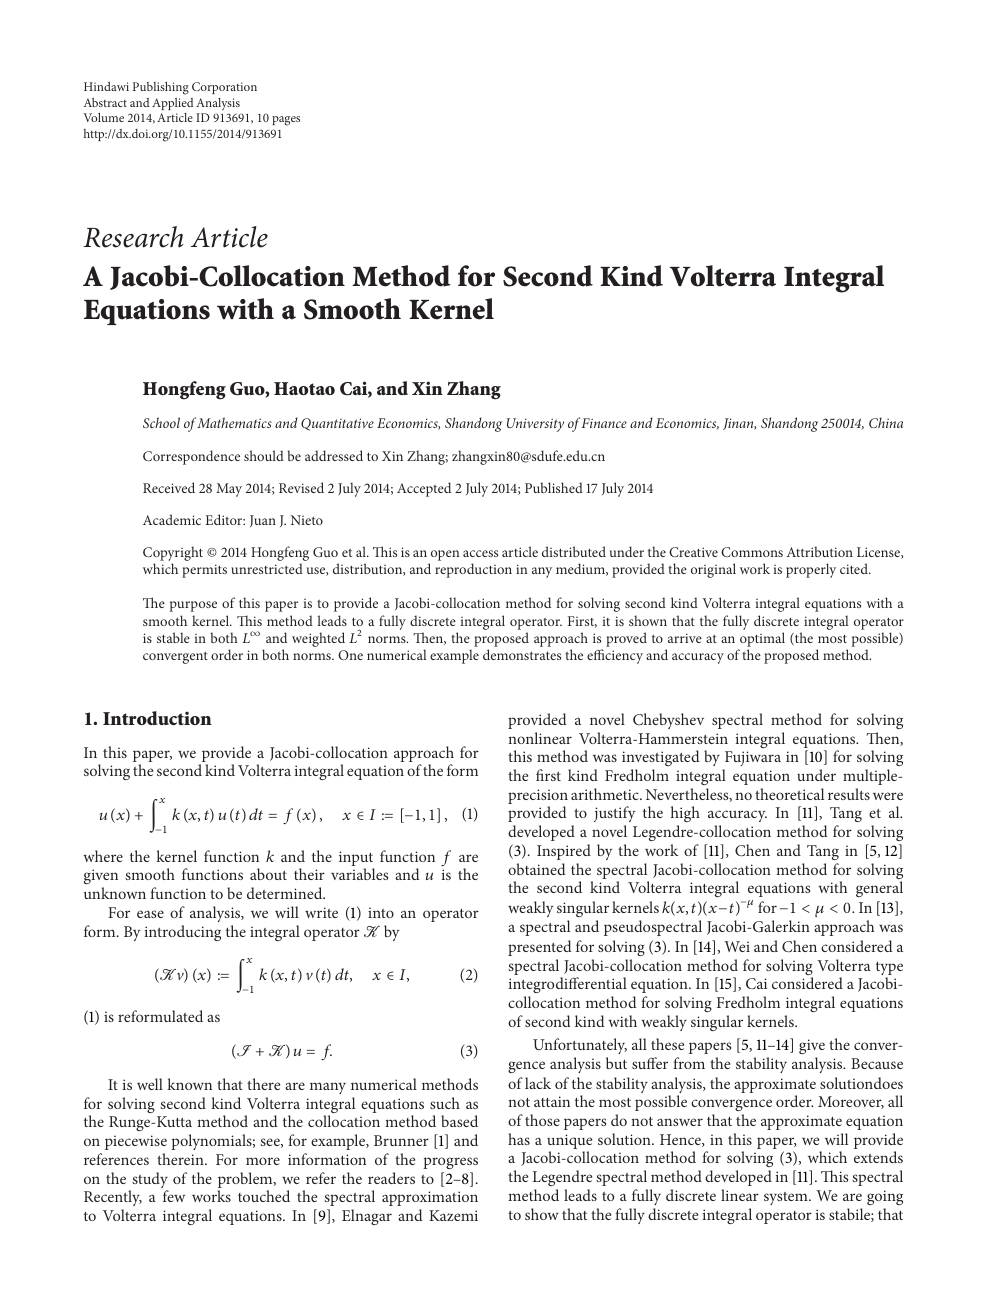 A Jacobi Collocation Method For Second Kind Volterra Integral Equations With A Smooth Kernel Topic Of Research Paper In Mathematics Download Scholarly Article Pdf And Read For Free On Cyberleninka Open Science